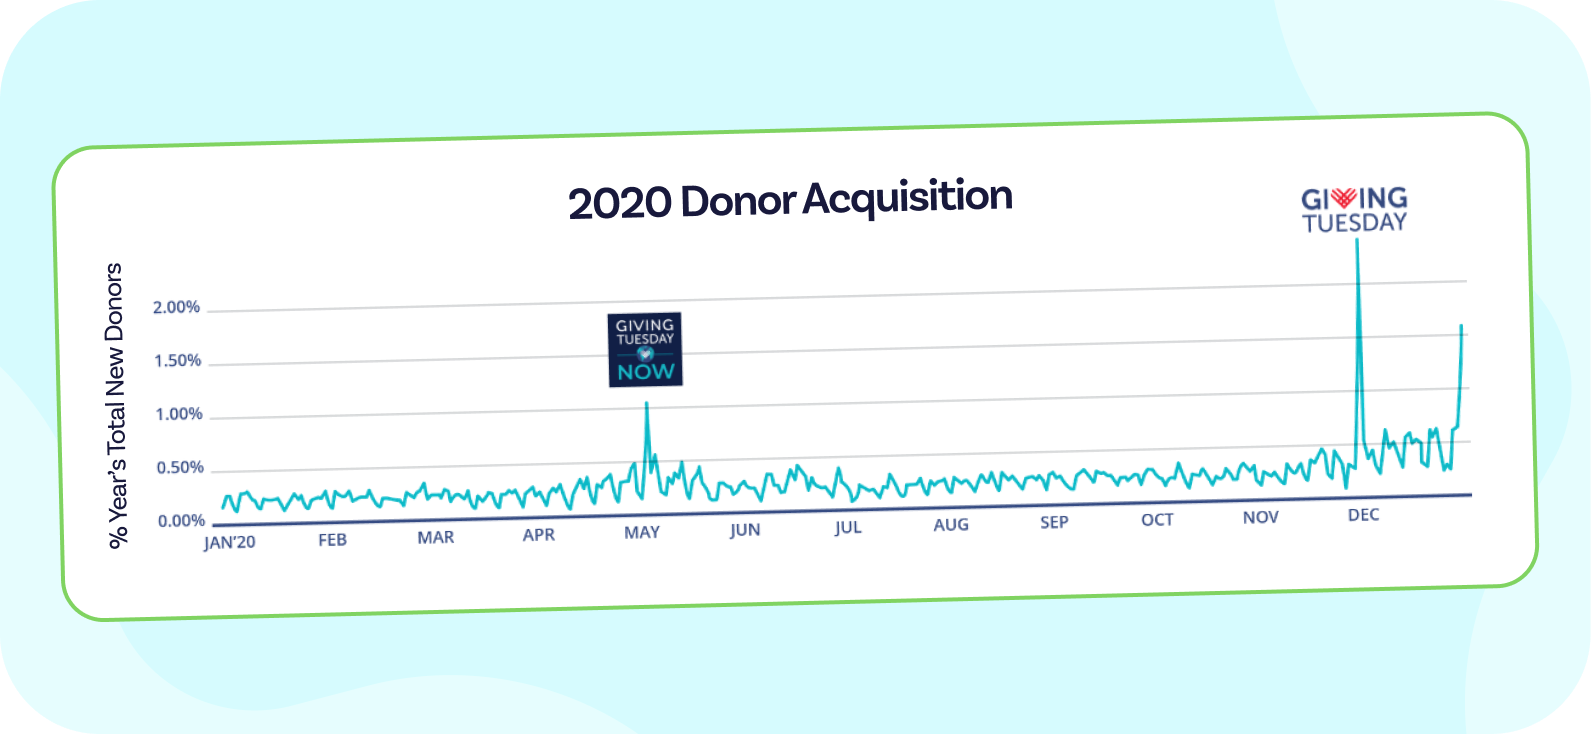 Graph of donor acquisition success throughout 2020 with GivingTuesday and GivingTuesday Now being standouts.